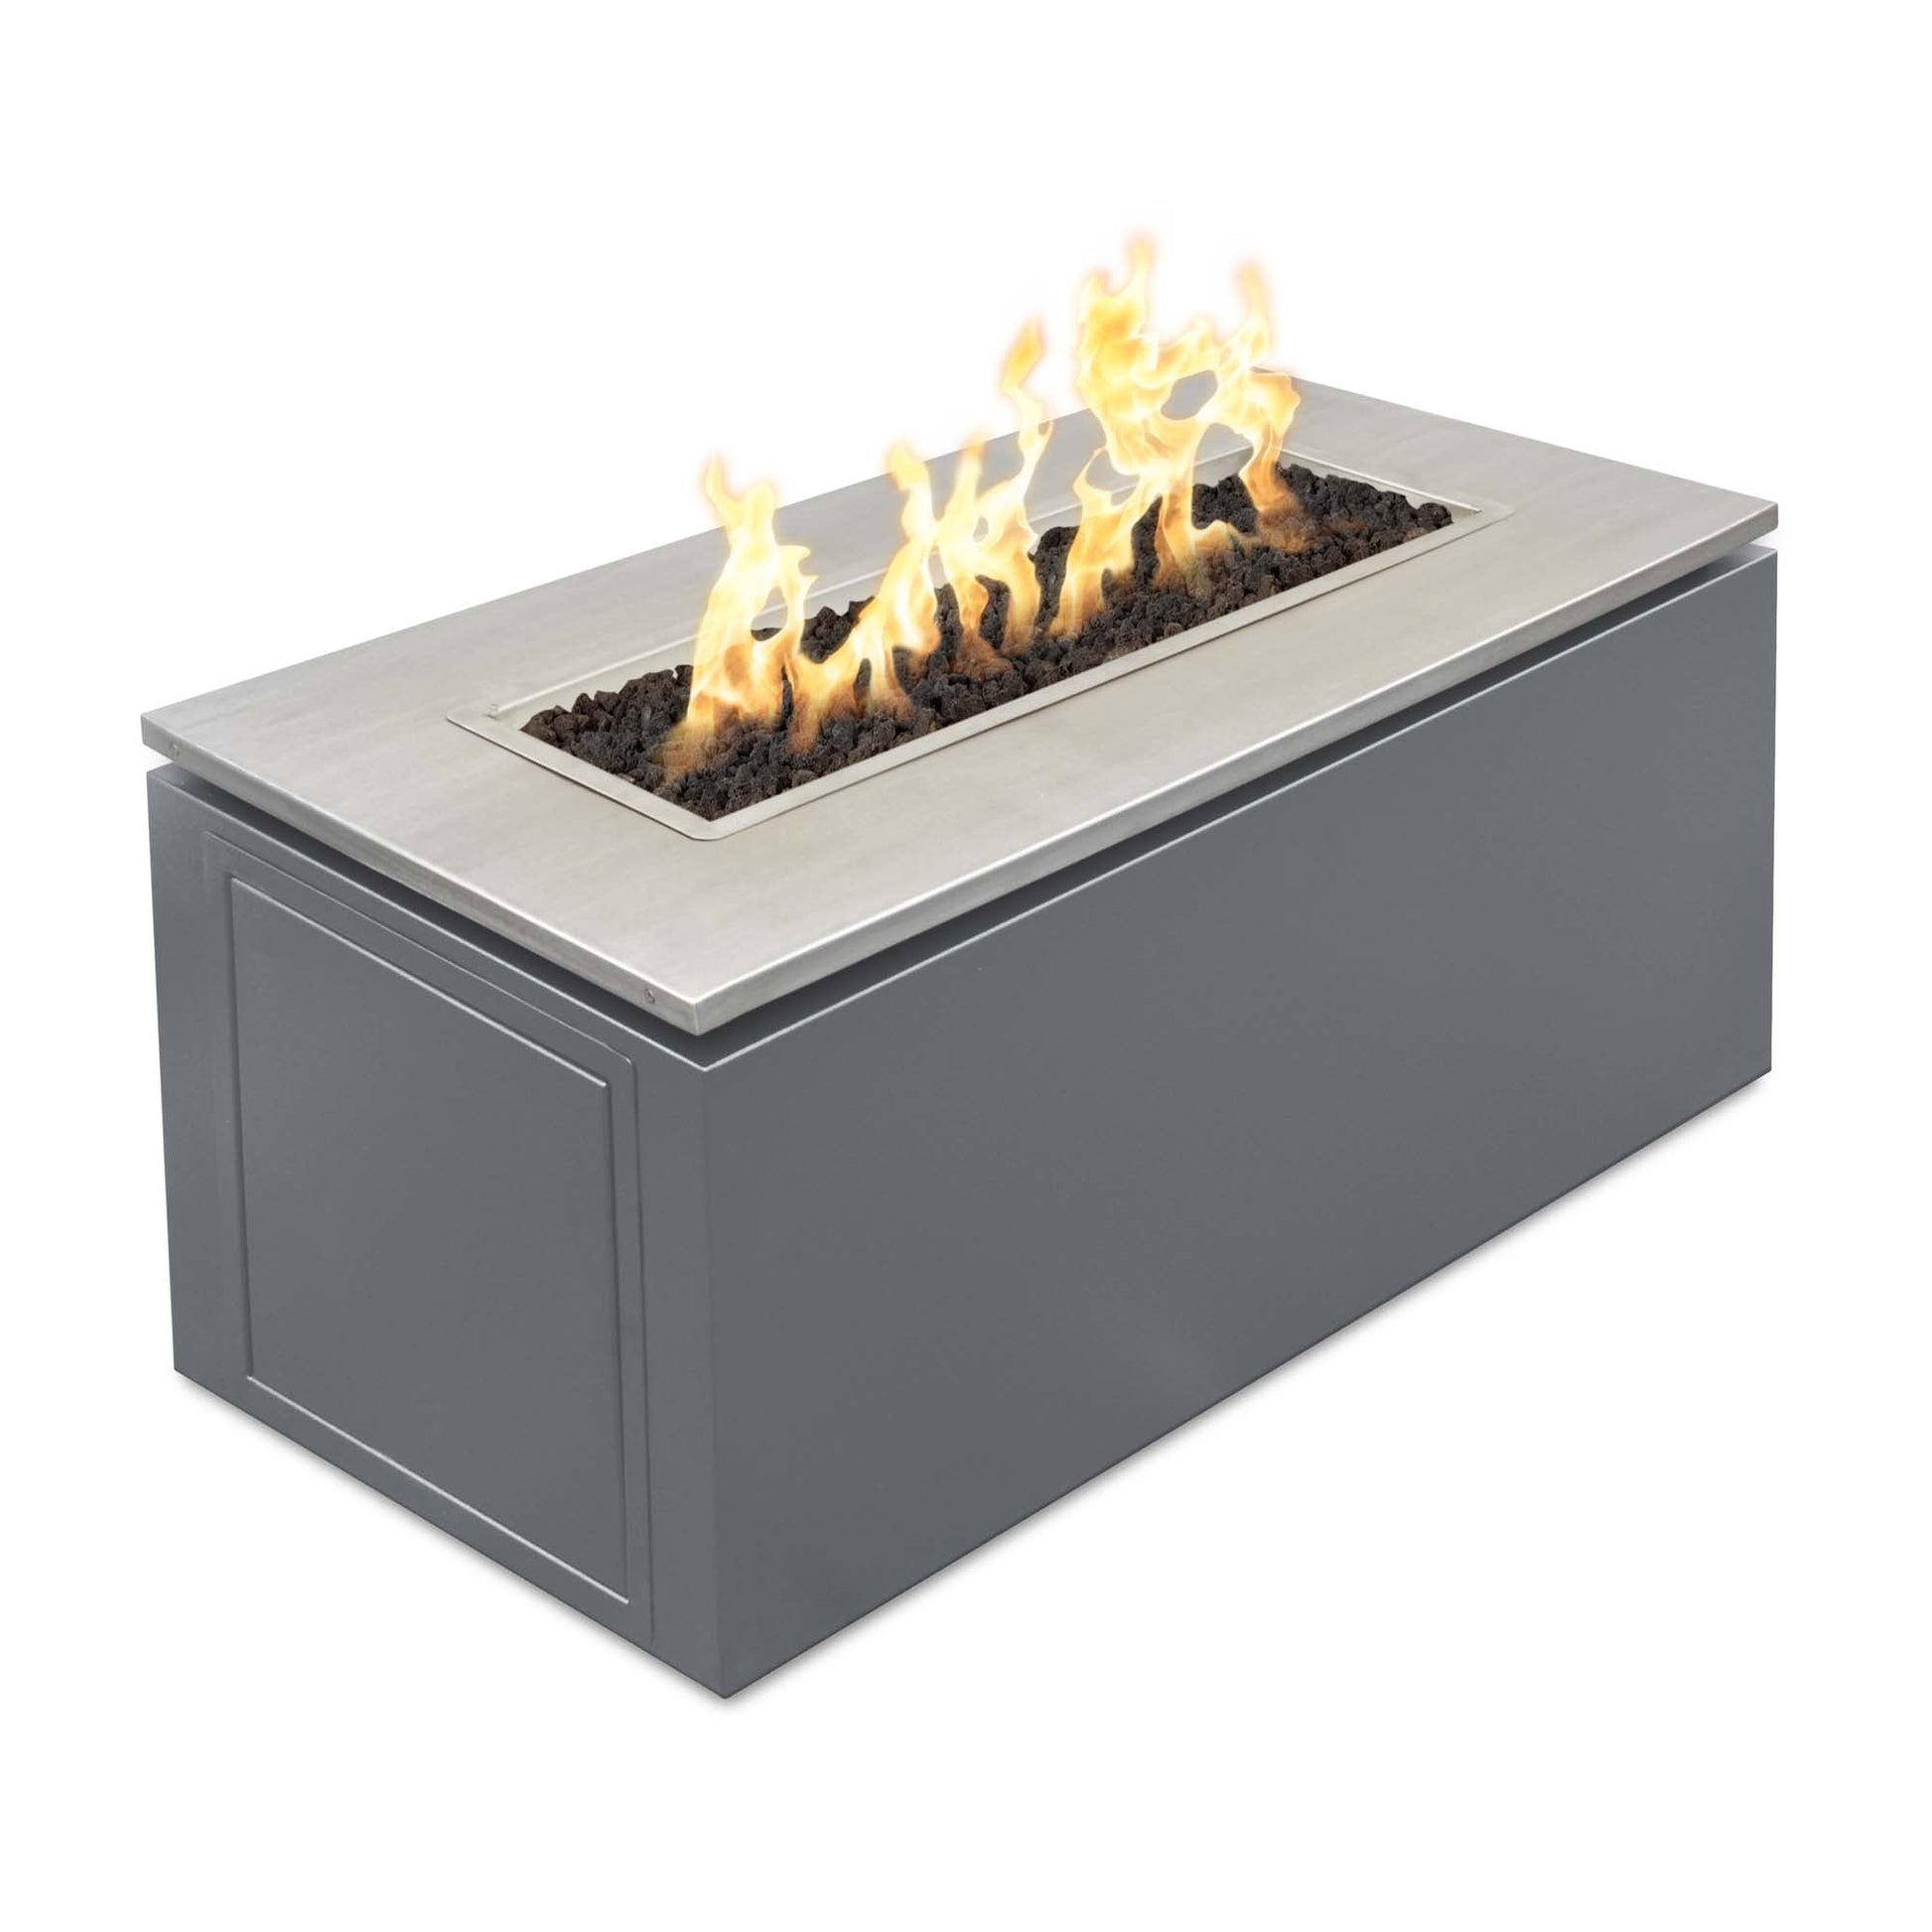 The Outdoor Plus Rectangular Merona 46" Stainless Steel Liquid Propane Fire Pit with Match Lit with Flame Sense Ignition